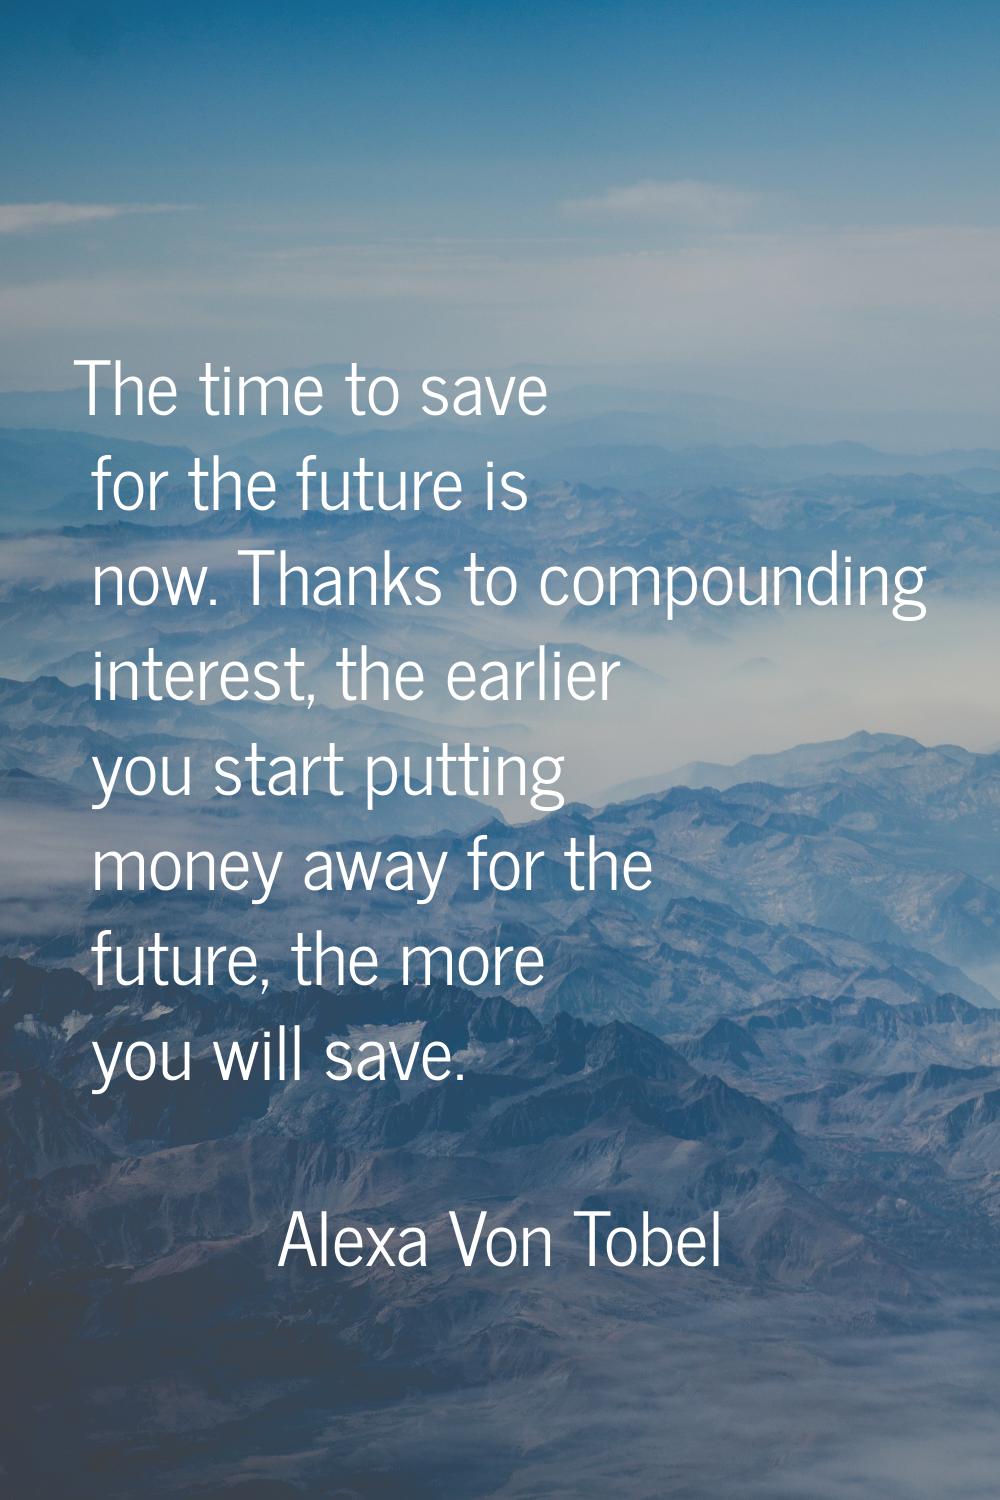 The time to save for the future is now. Thanks to compounding interest, the earlier you start putti